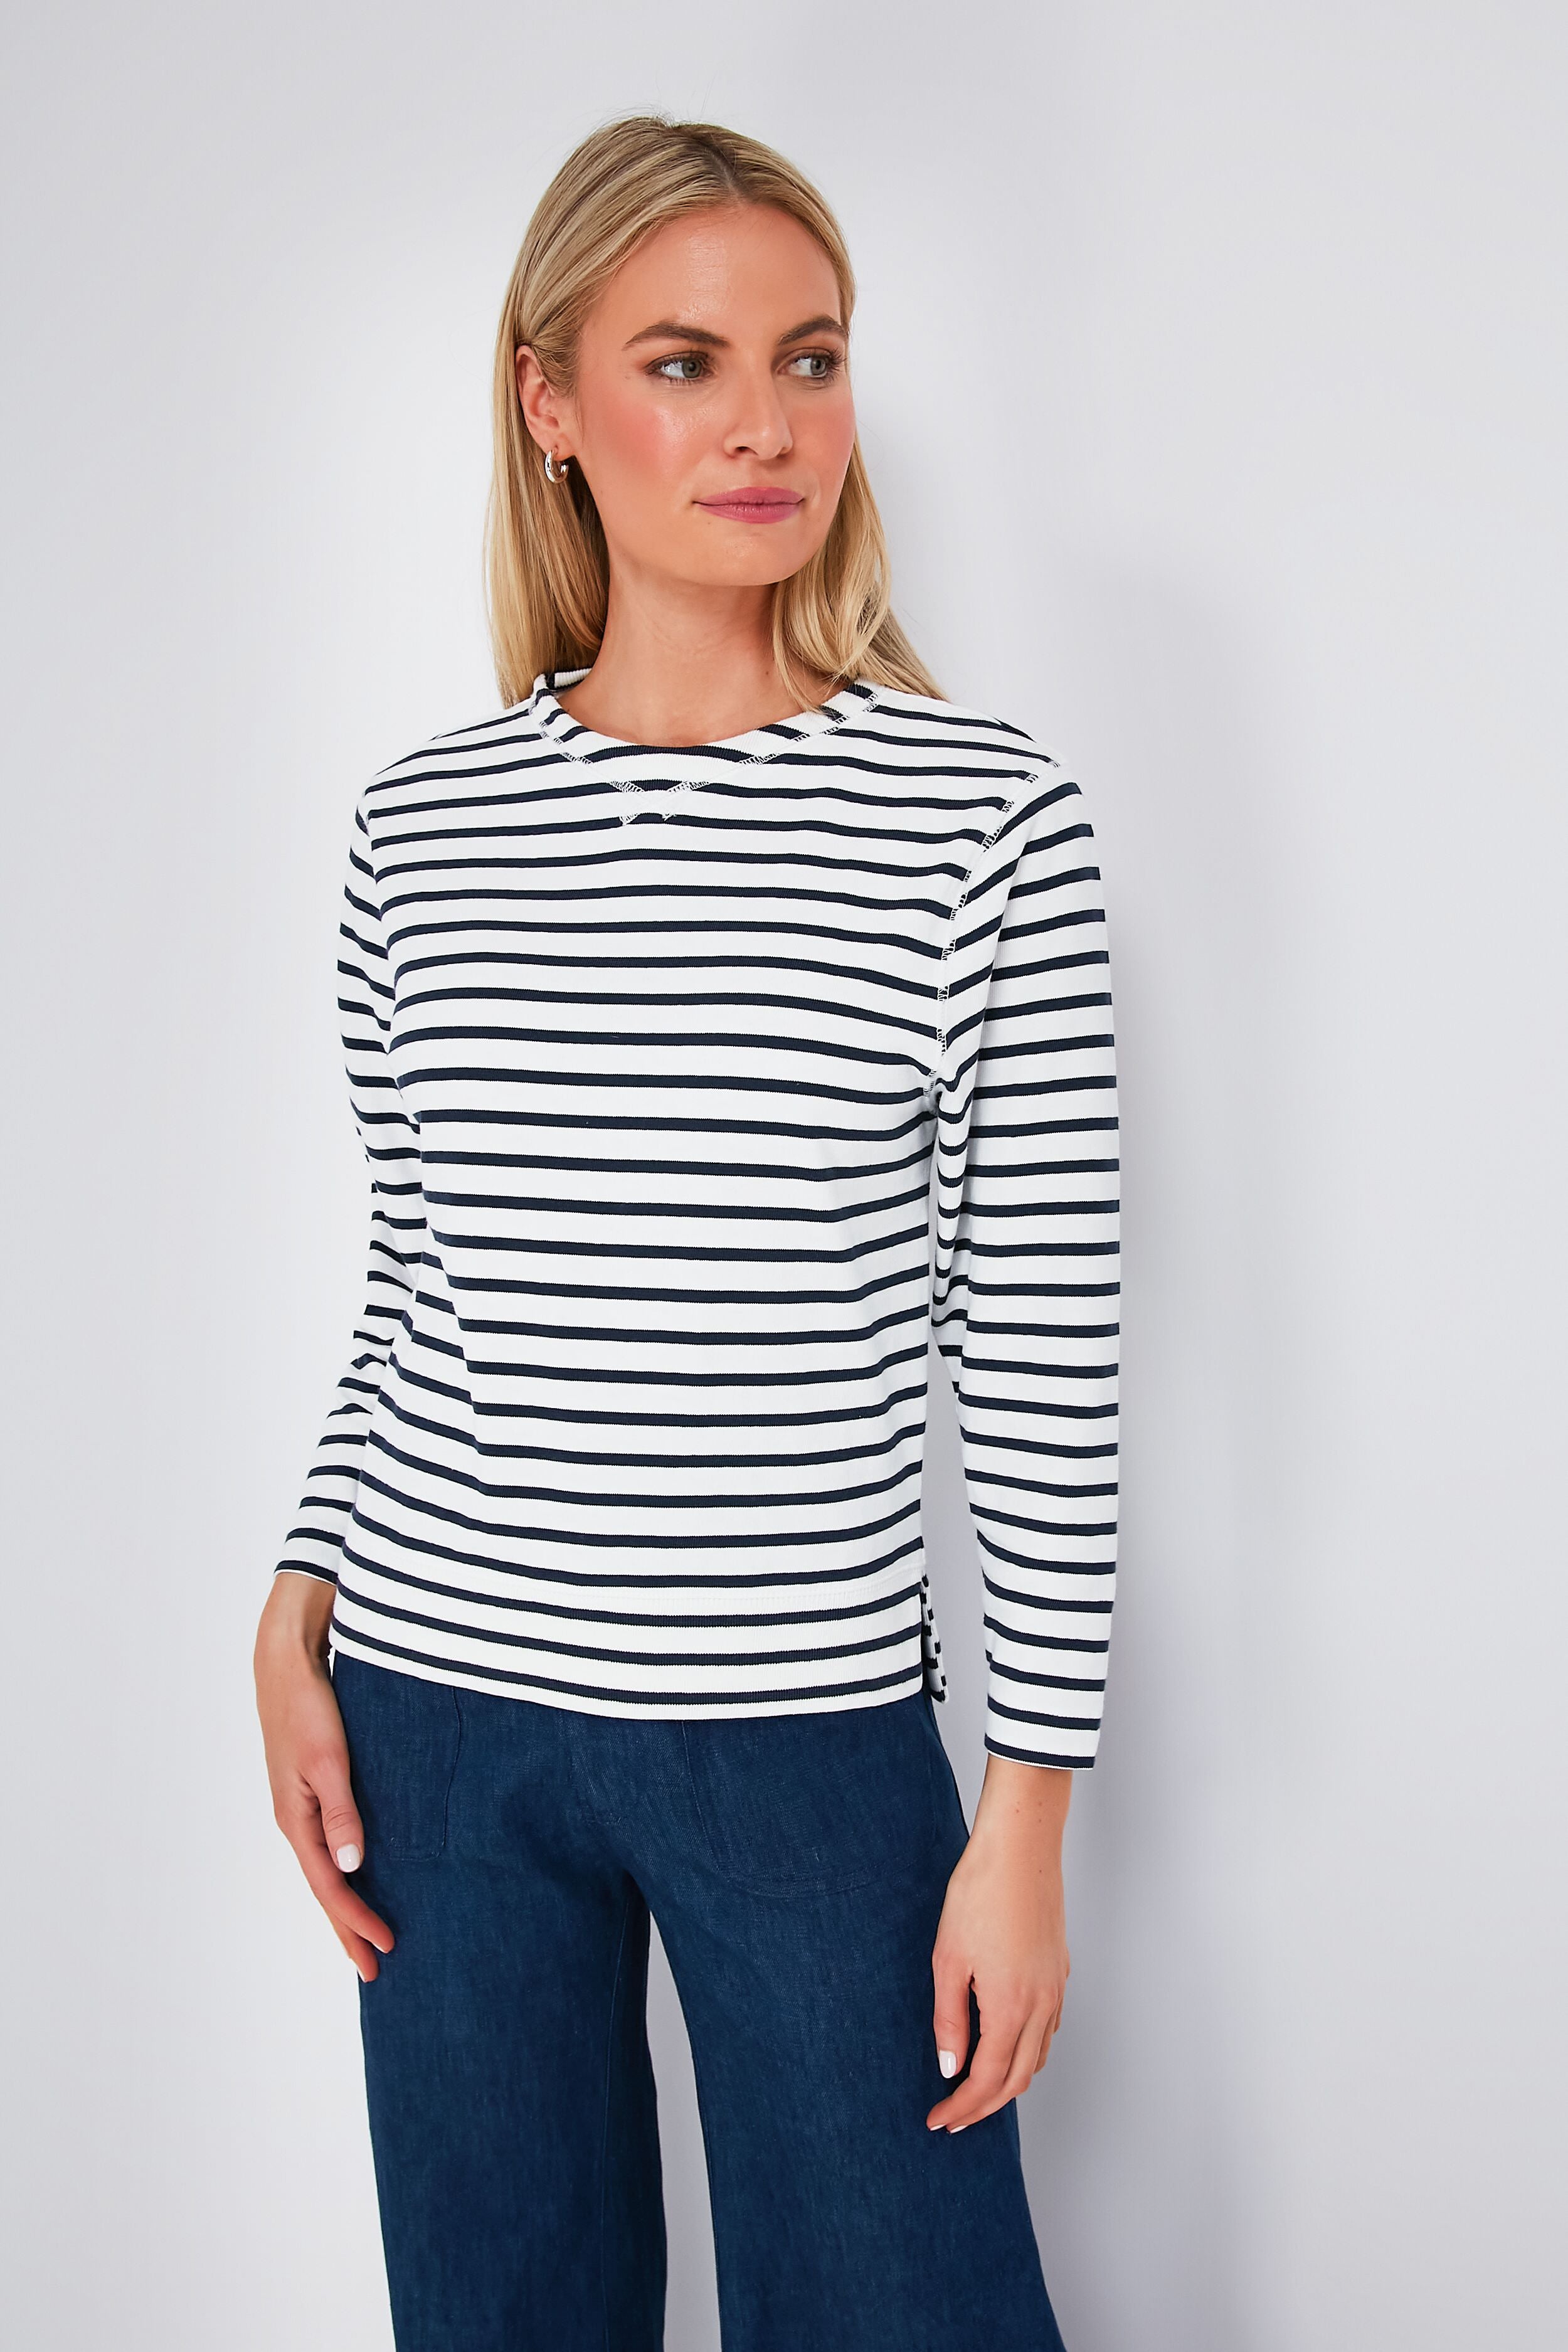 Off White and Navy Lakeside Striped Tee | Alex Mill